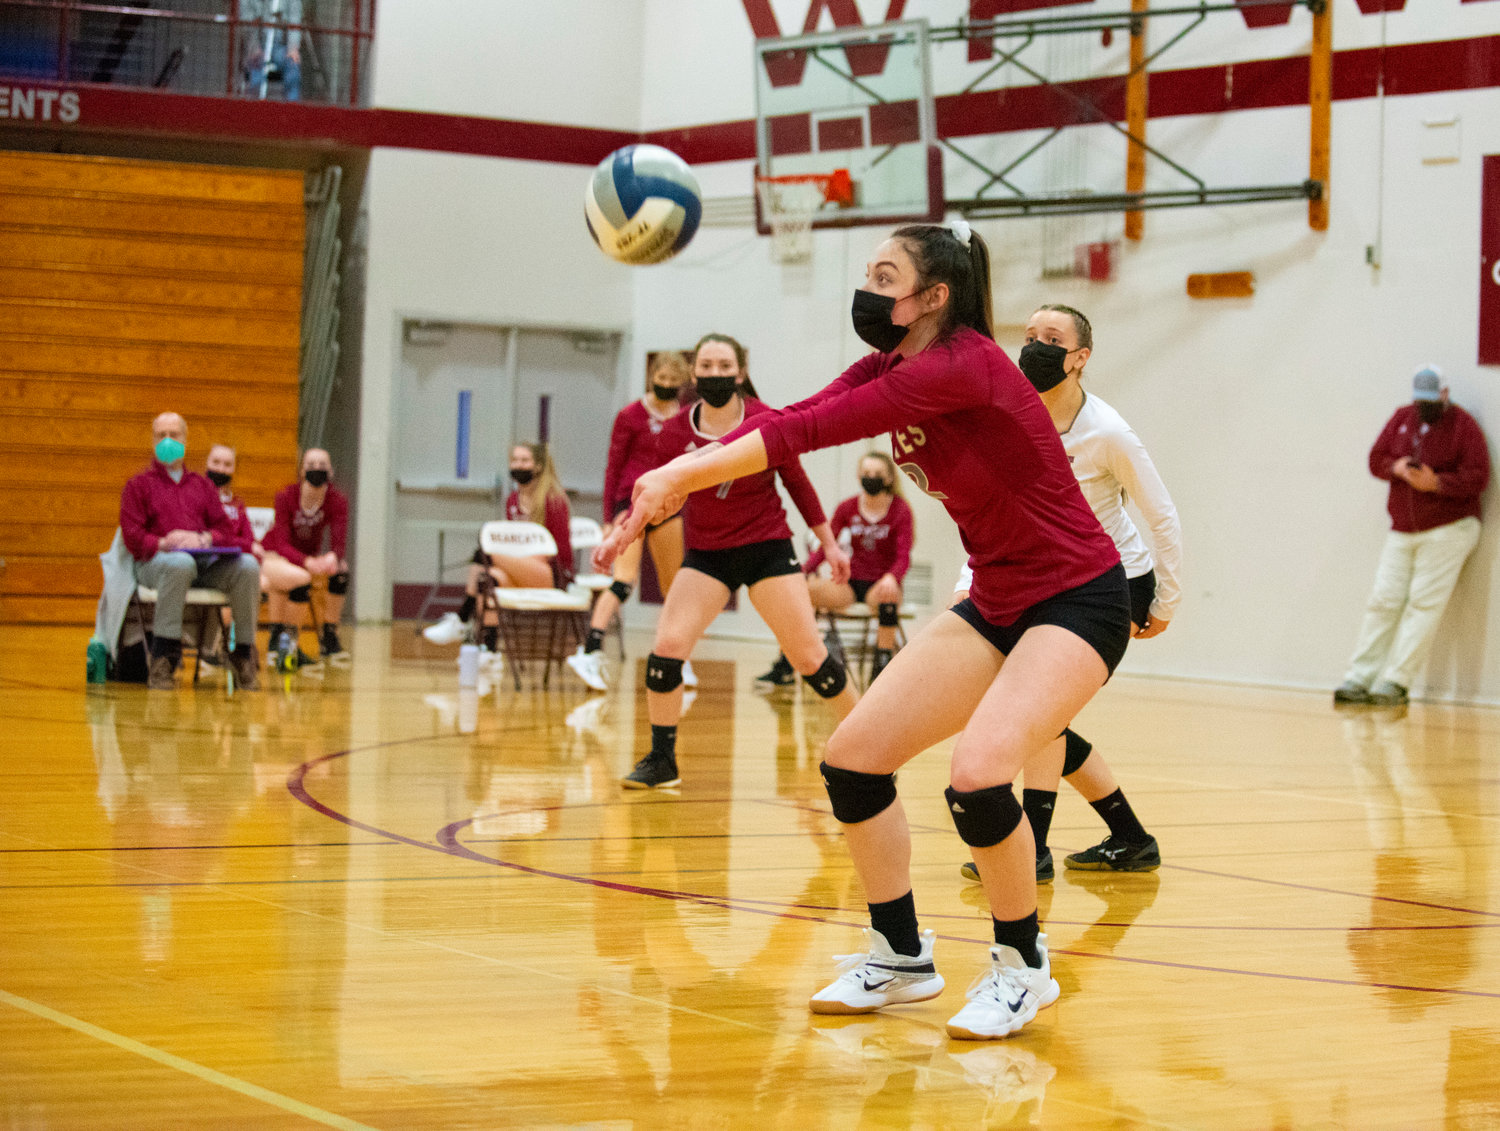 W.F. West's Keira Clark works in serve receive against Aberdeen on Tuesday.